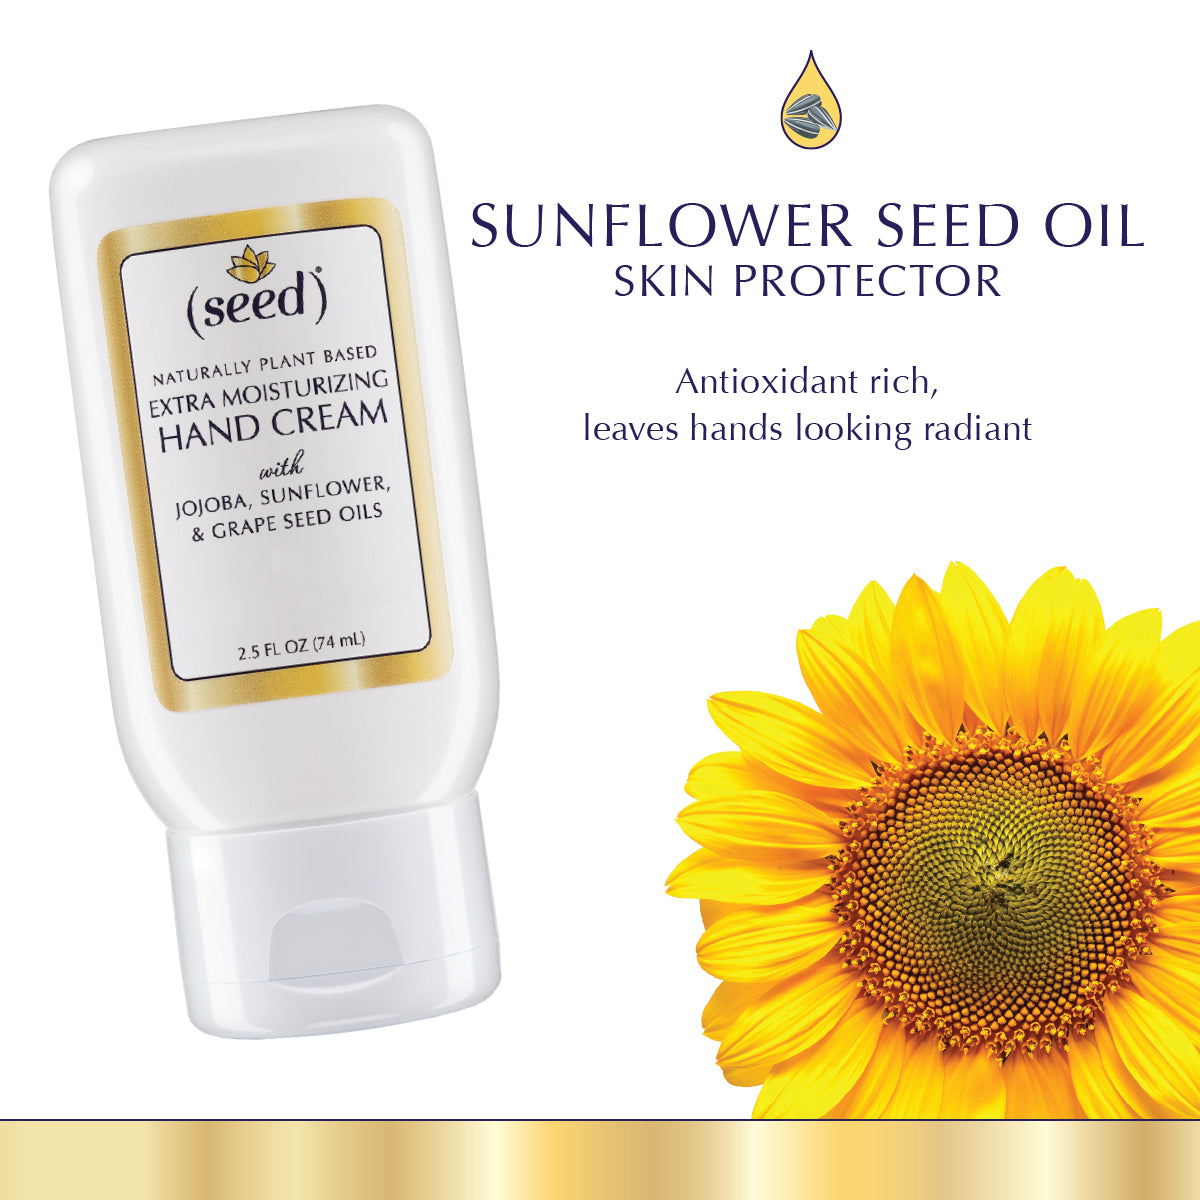 Seed Hand Cream is enriched with sunflower seed oil